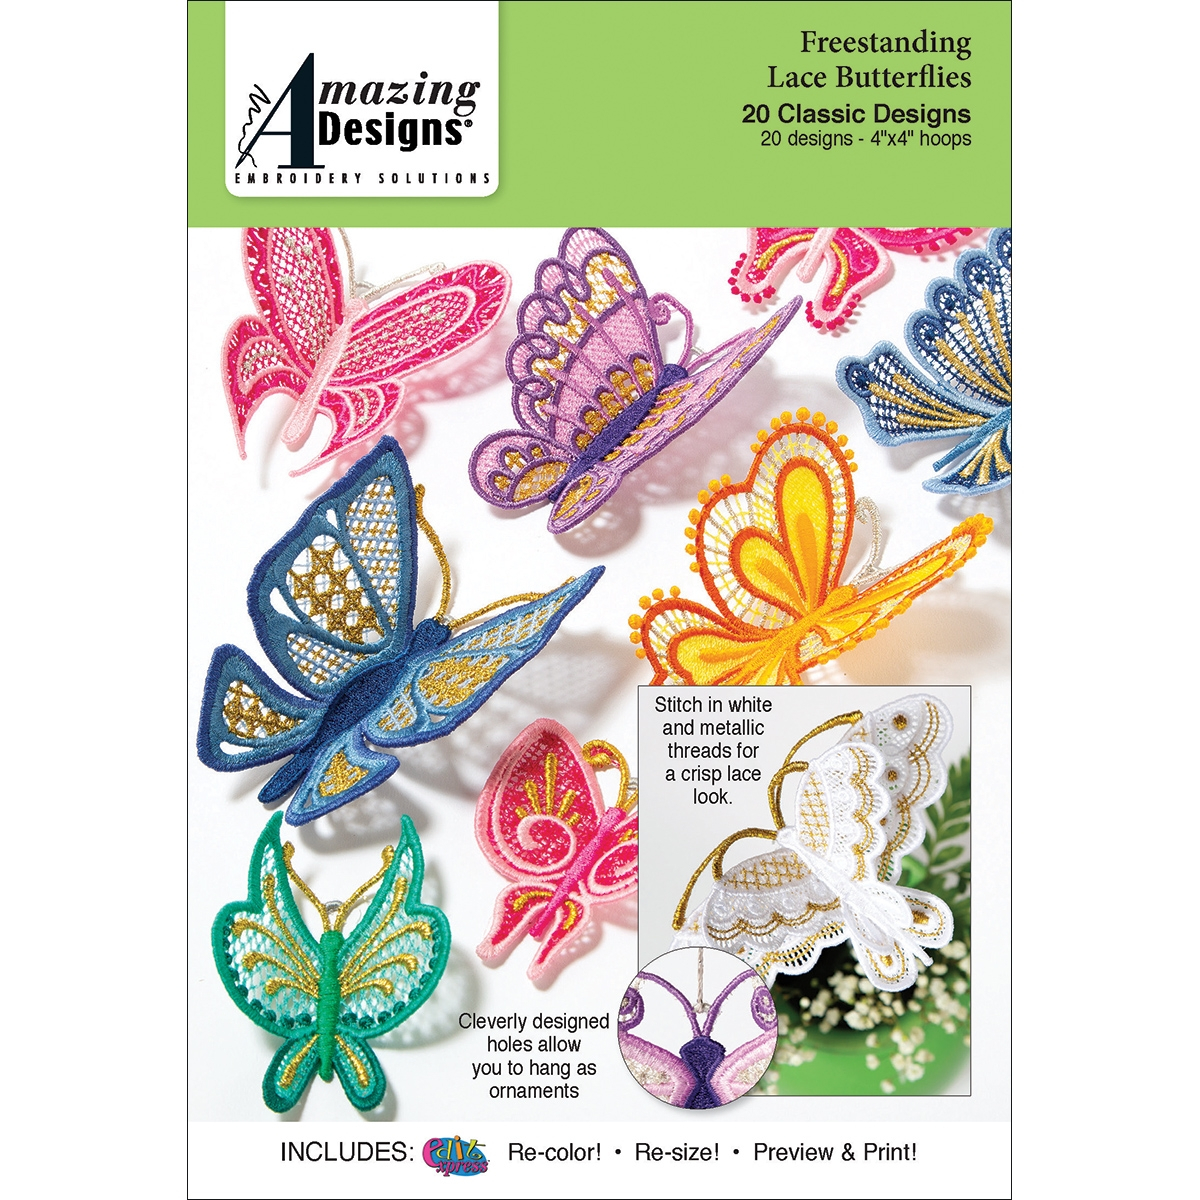 Free Standing Lace Embroidery Patterns Freestanding Lace Butterflies Embroidery Designs